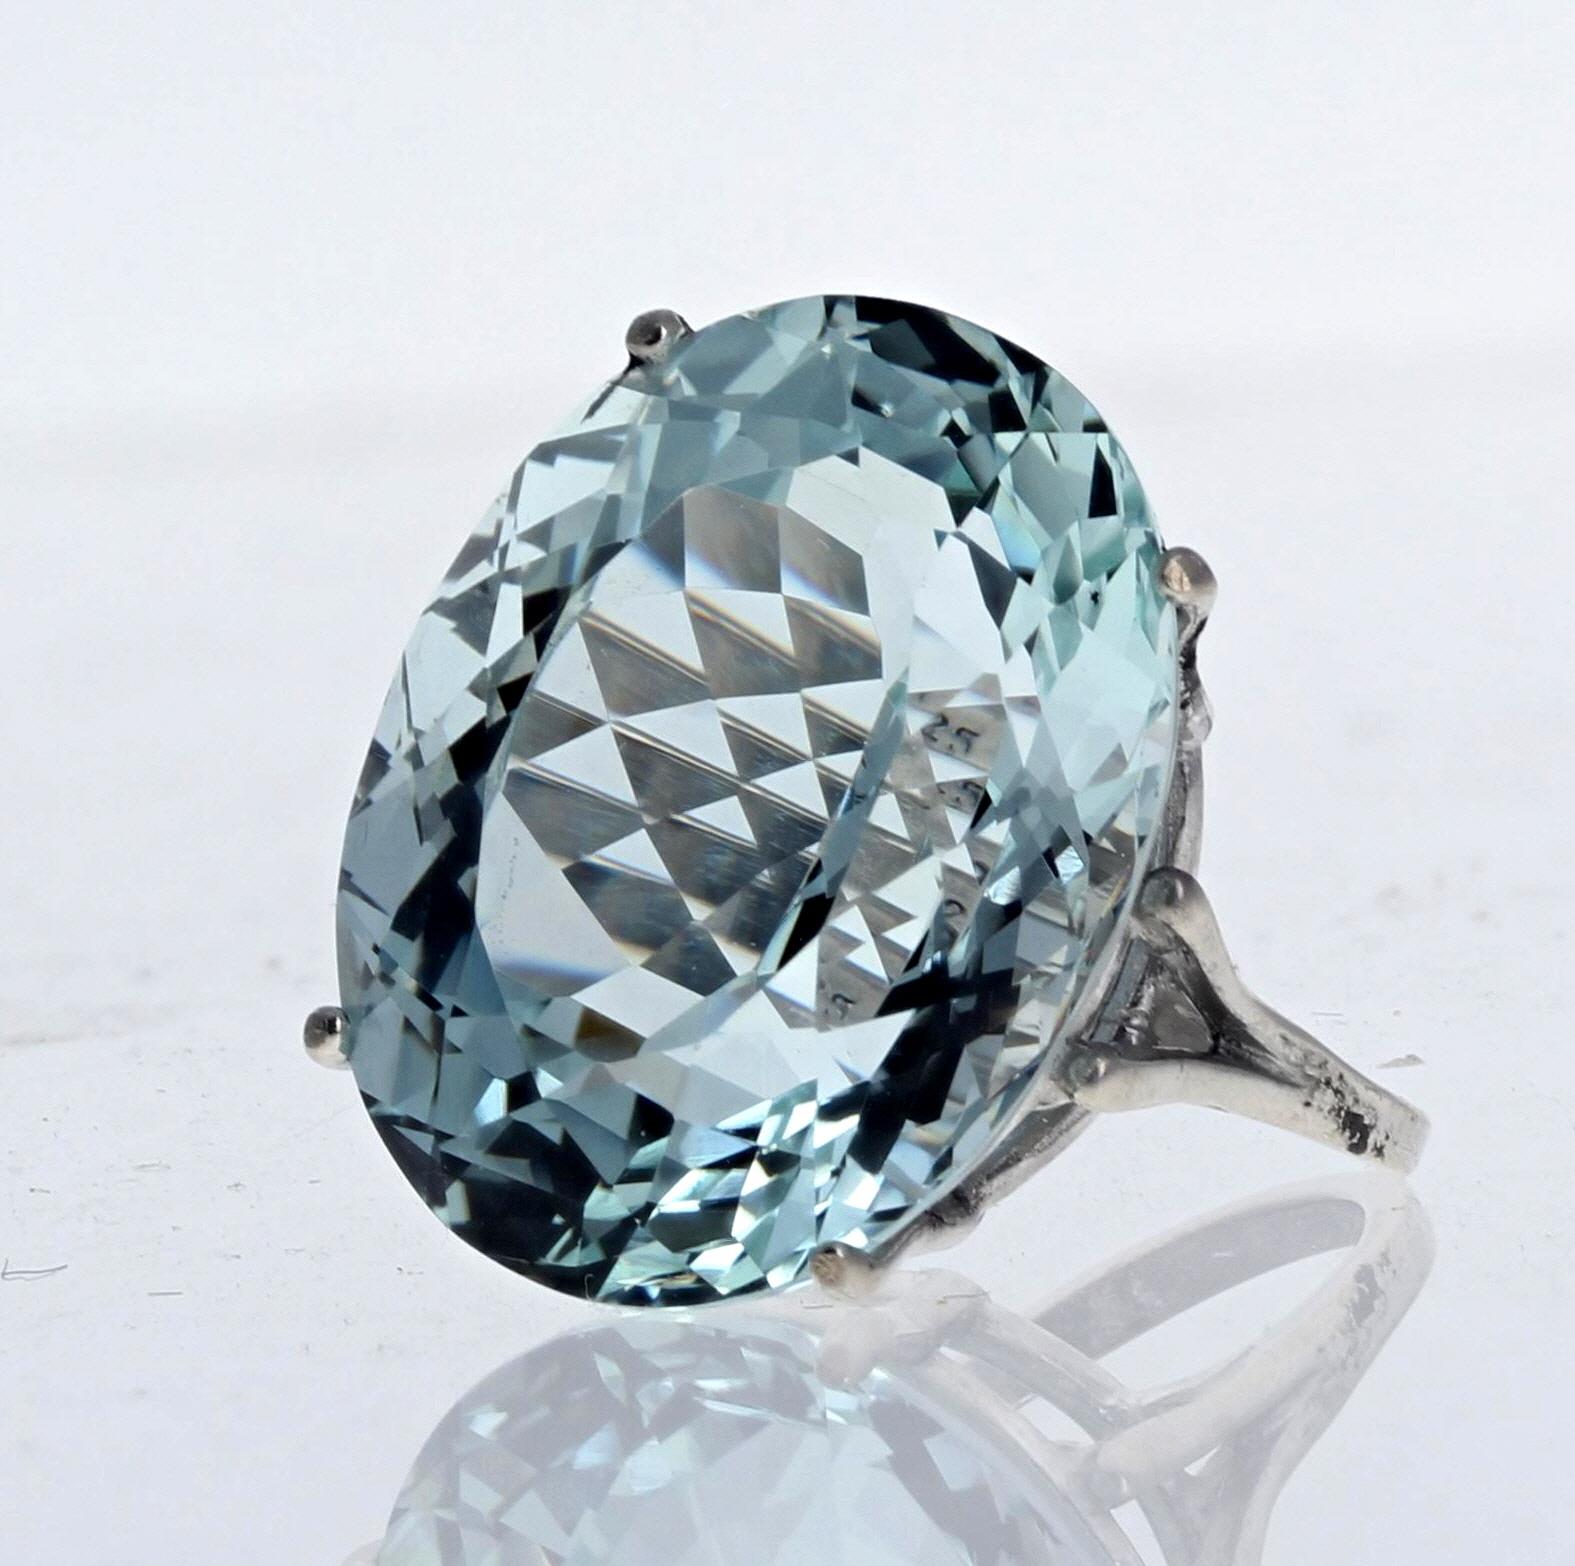 Contemporary AJD Beyond Magnificent Brilliant Natural 25.3Ct, Intense Blue Aquamarine Ring For Sale